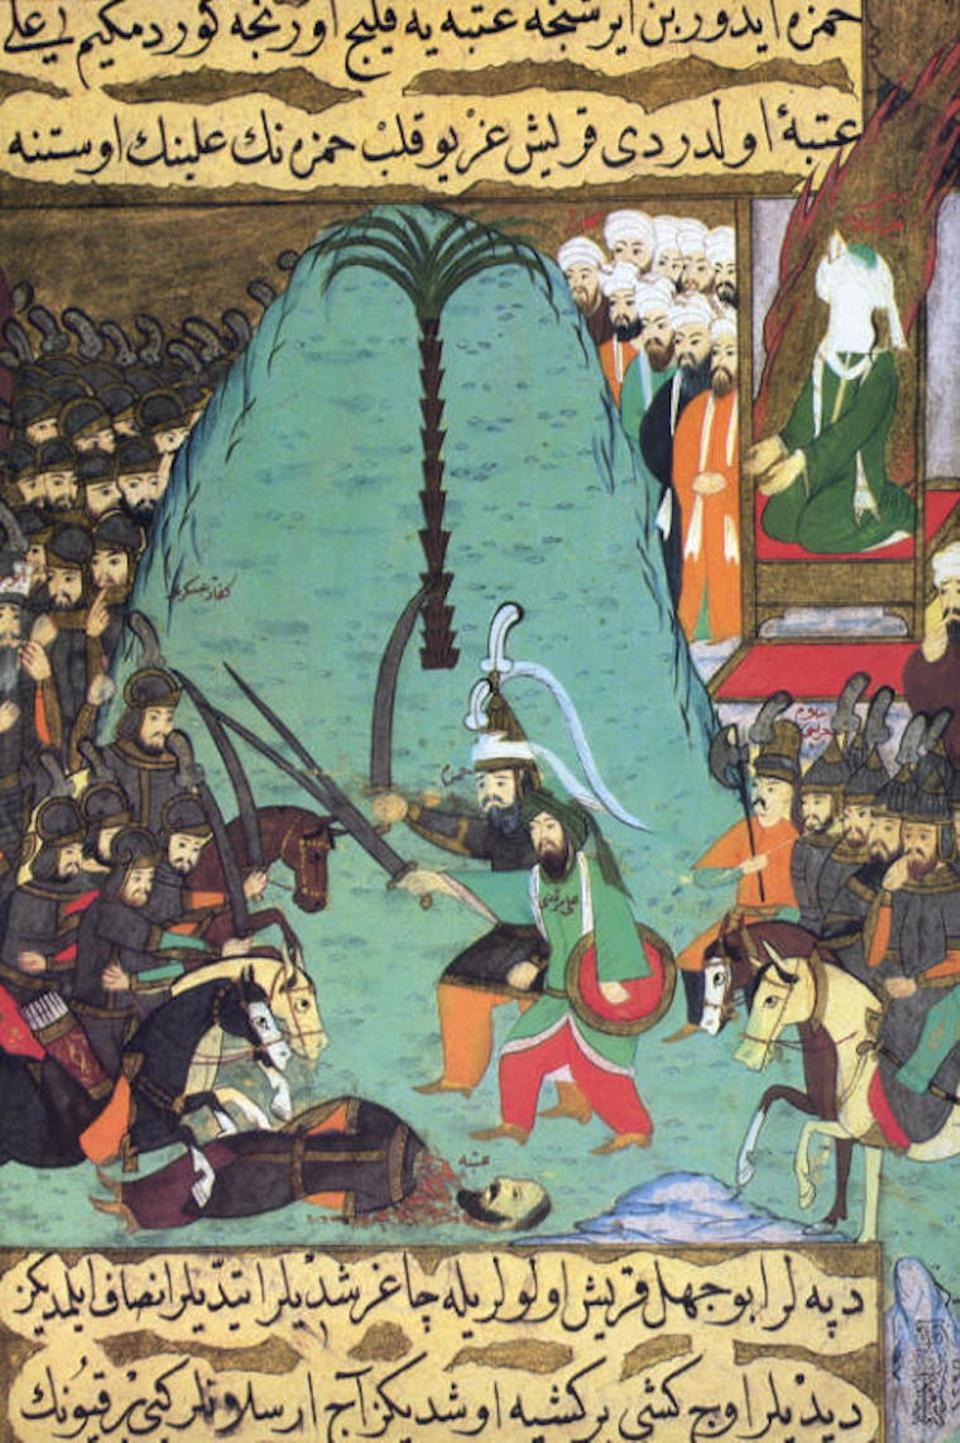 Prophet Muhammed's leading companions, Hamza and Ali, lead the Muslim army at Badr, according to an Ottoman Naskh.